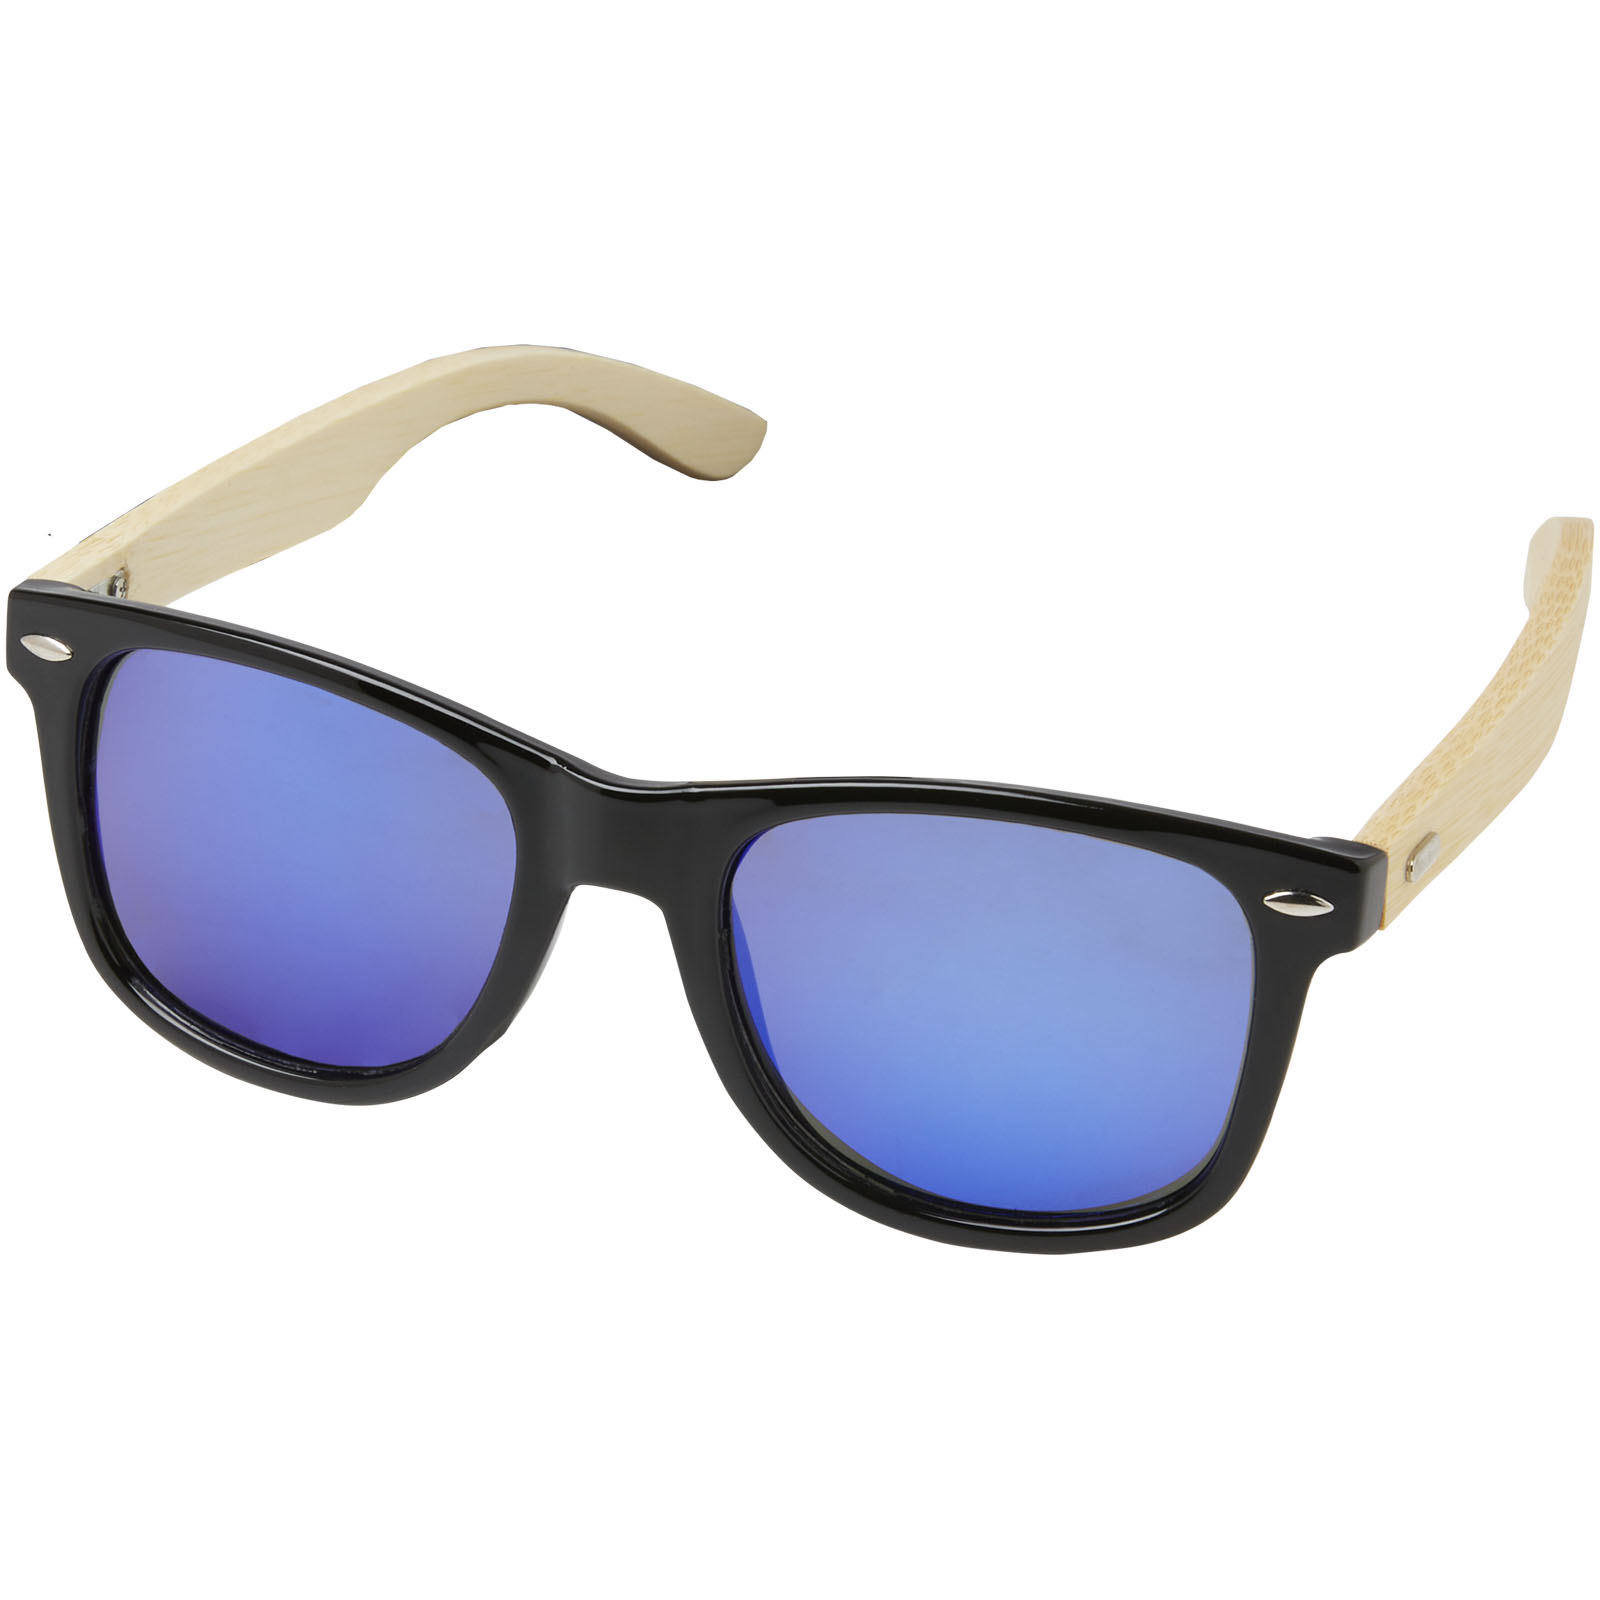 Sunglasses - Taiyō rPET/bamboo mirrored polarized sunglasses in gift box